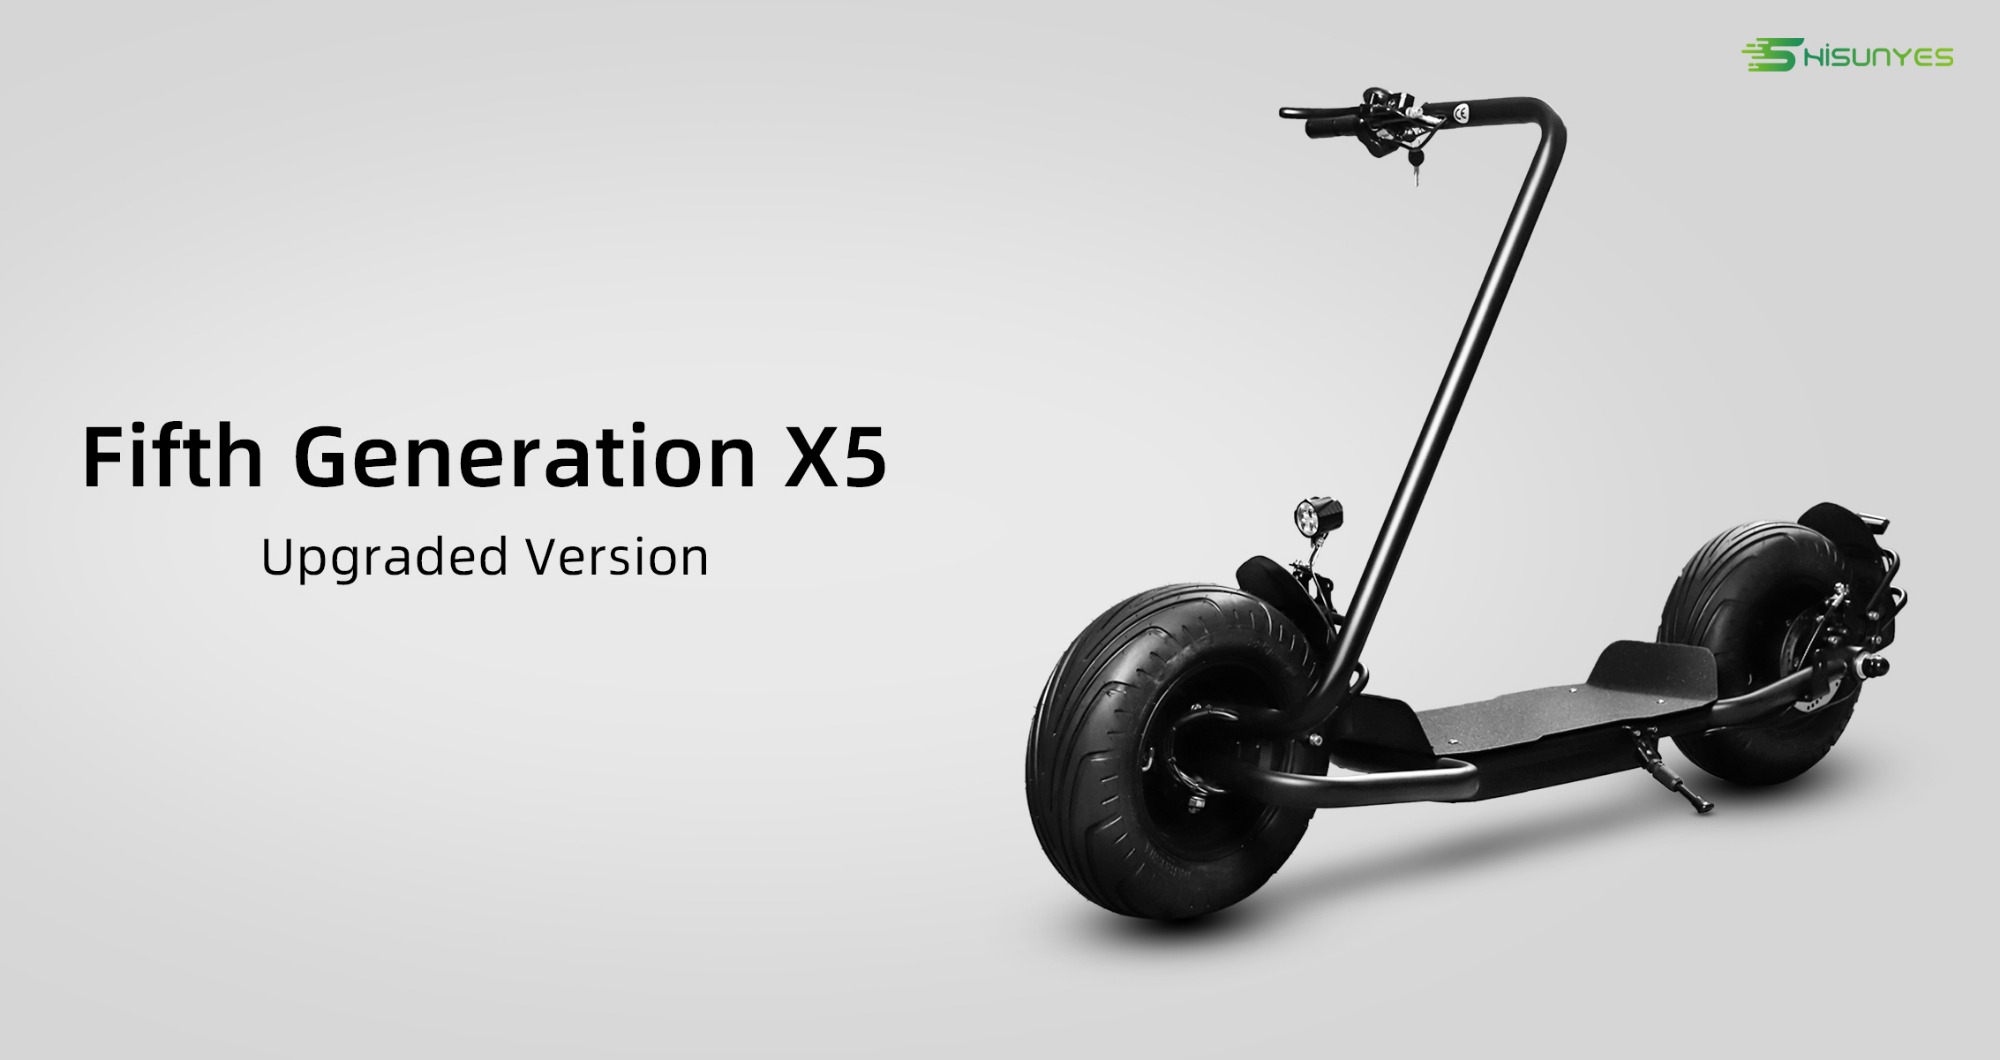 do you want to ride it? the scooter X5